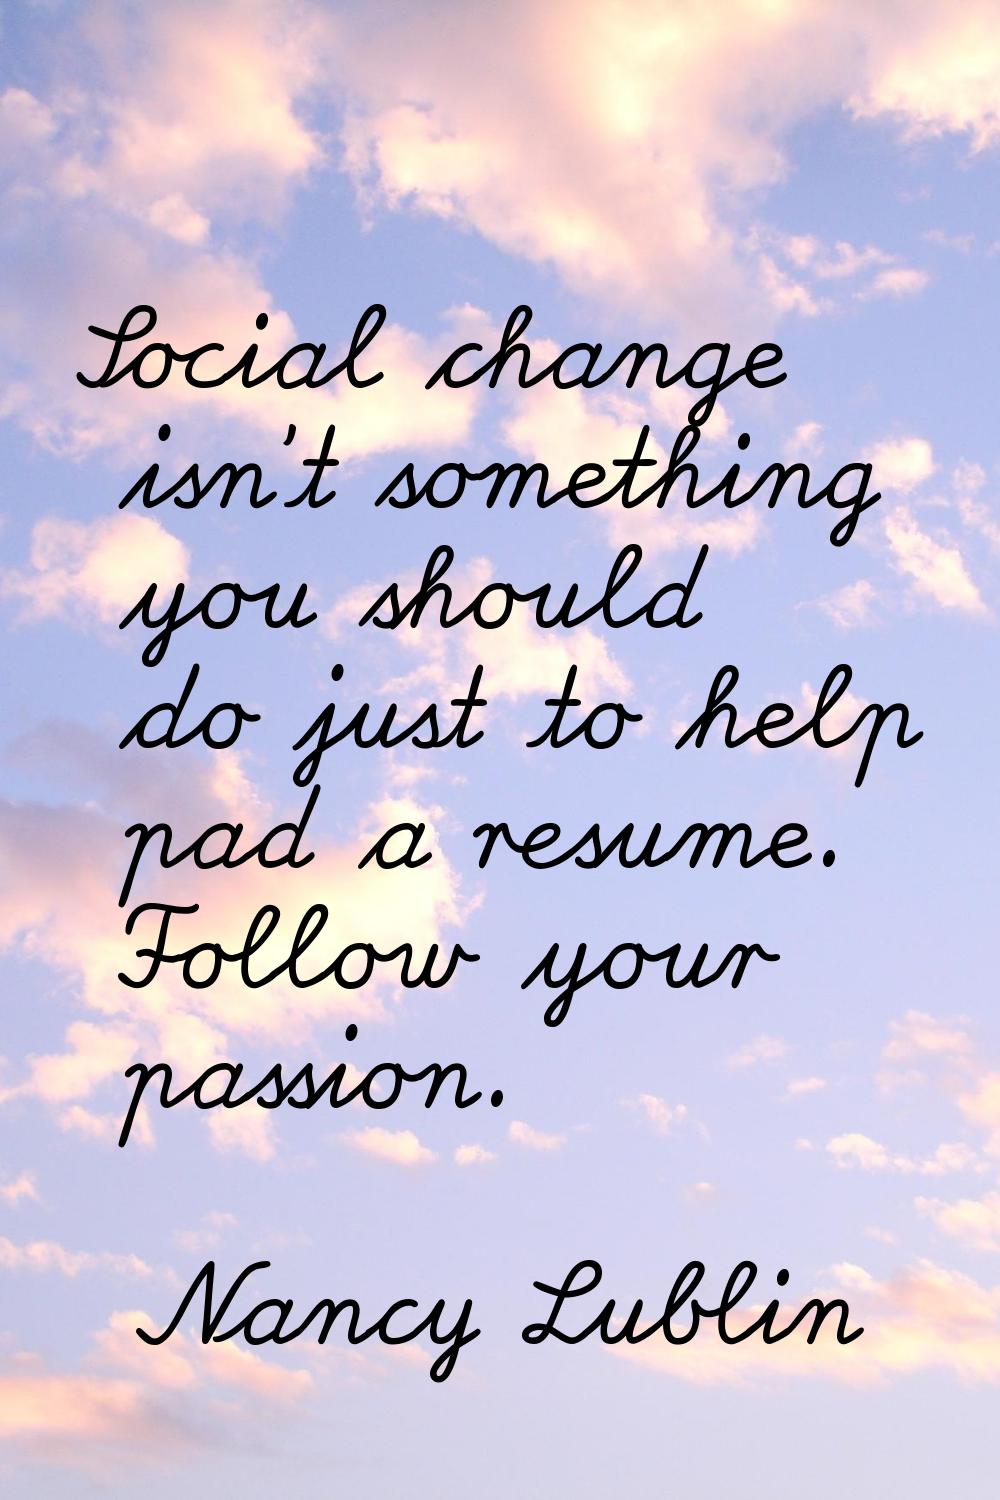 Social change isn't something you should do just to help pad a resume. Follow your passion.